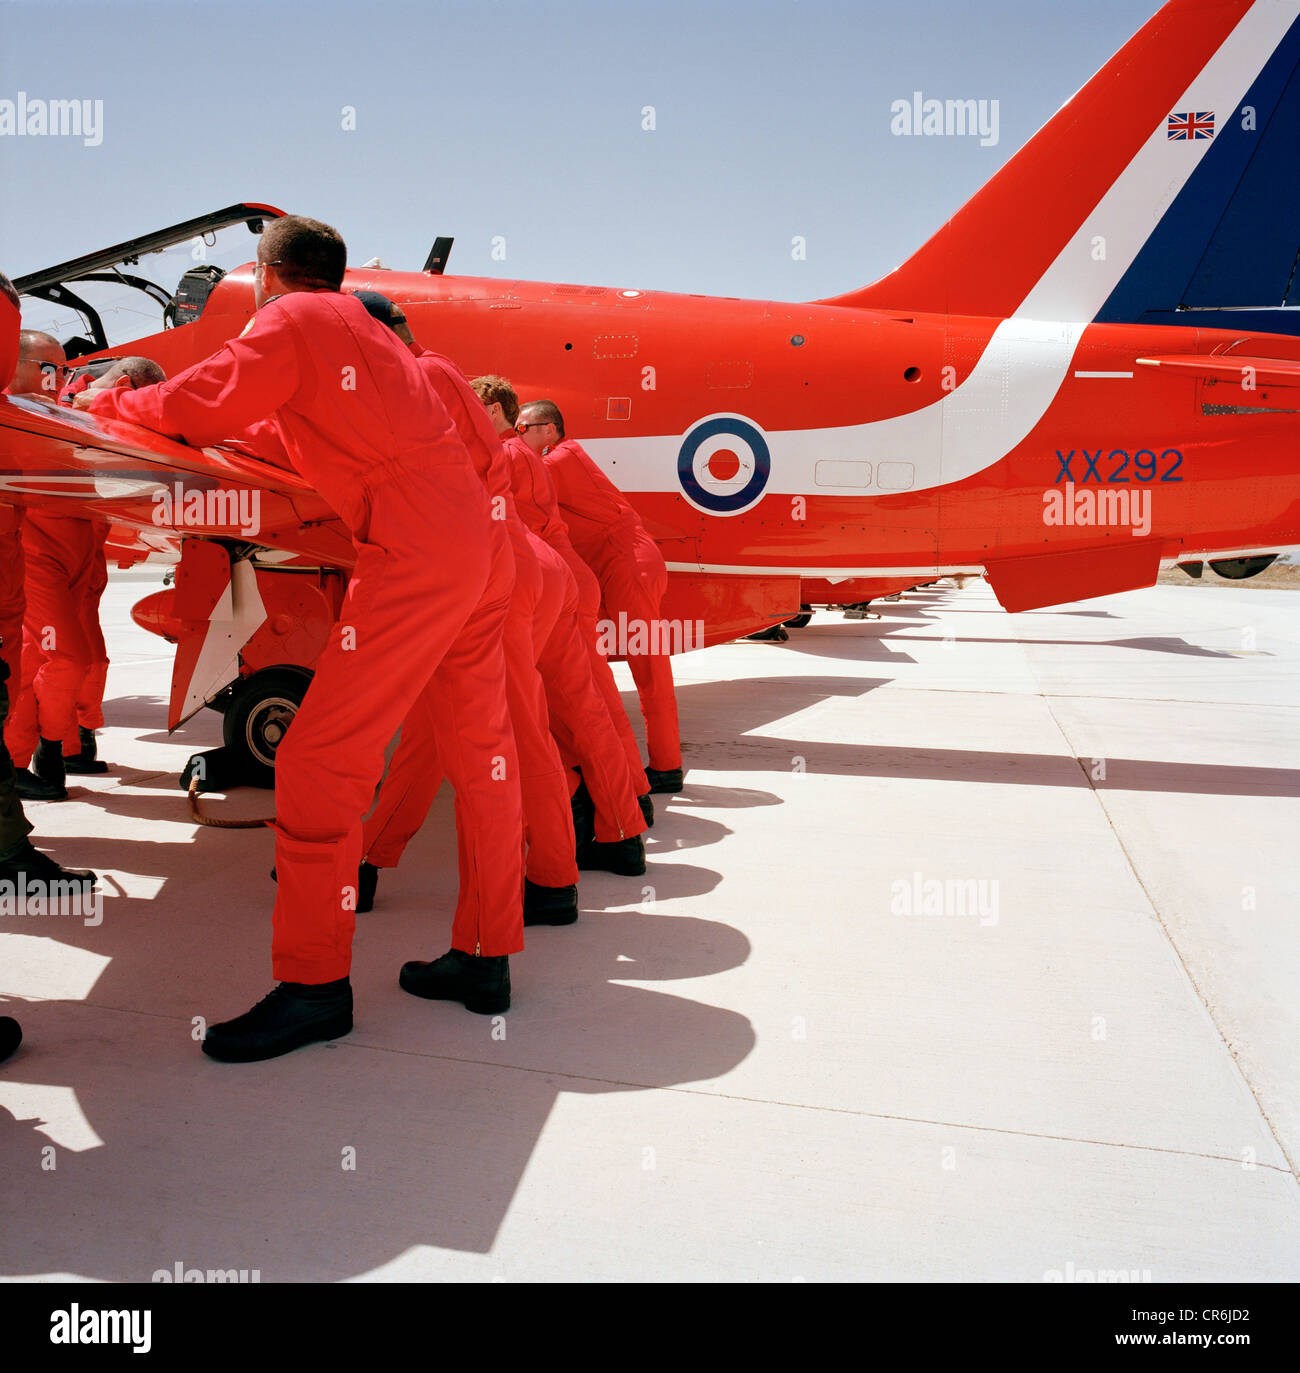 Pilots of the Red Arrows, Britain's RAF aerobatic team during pre-display briefing on a Hawk wing before an airshow. Stock Photo